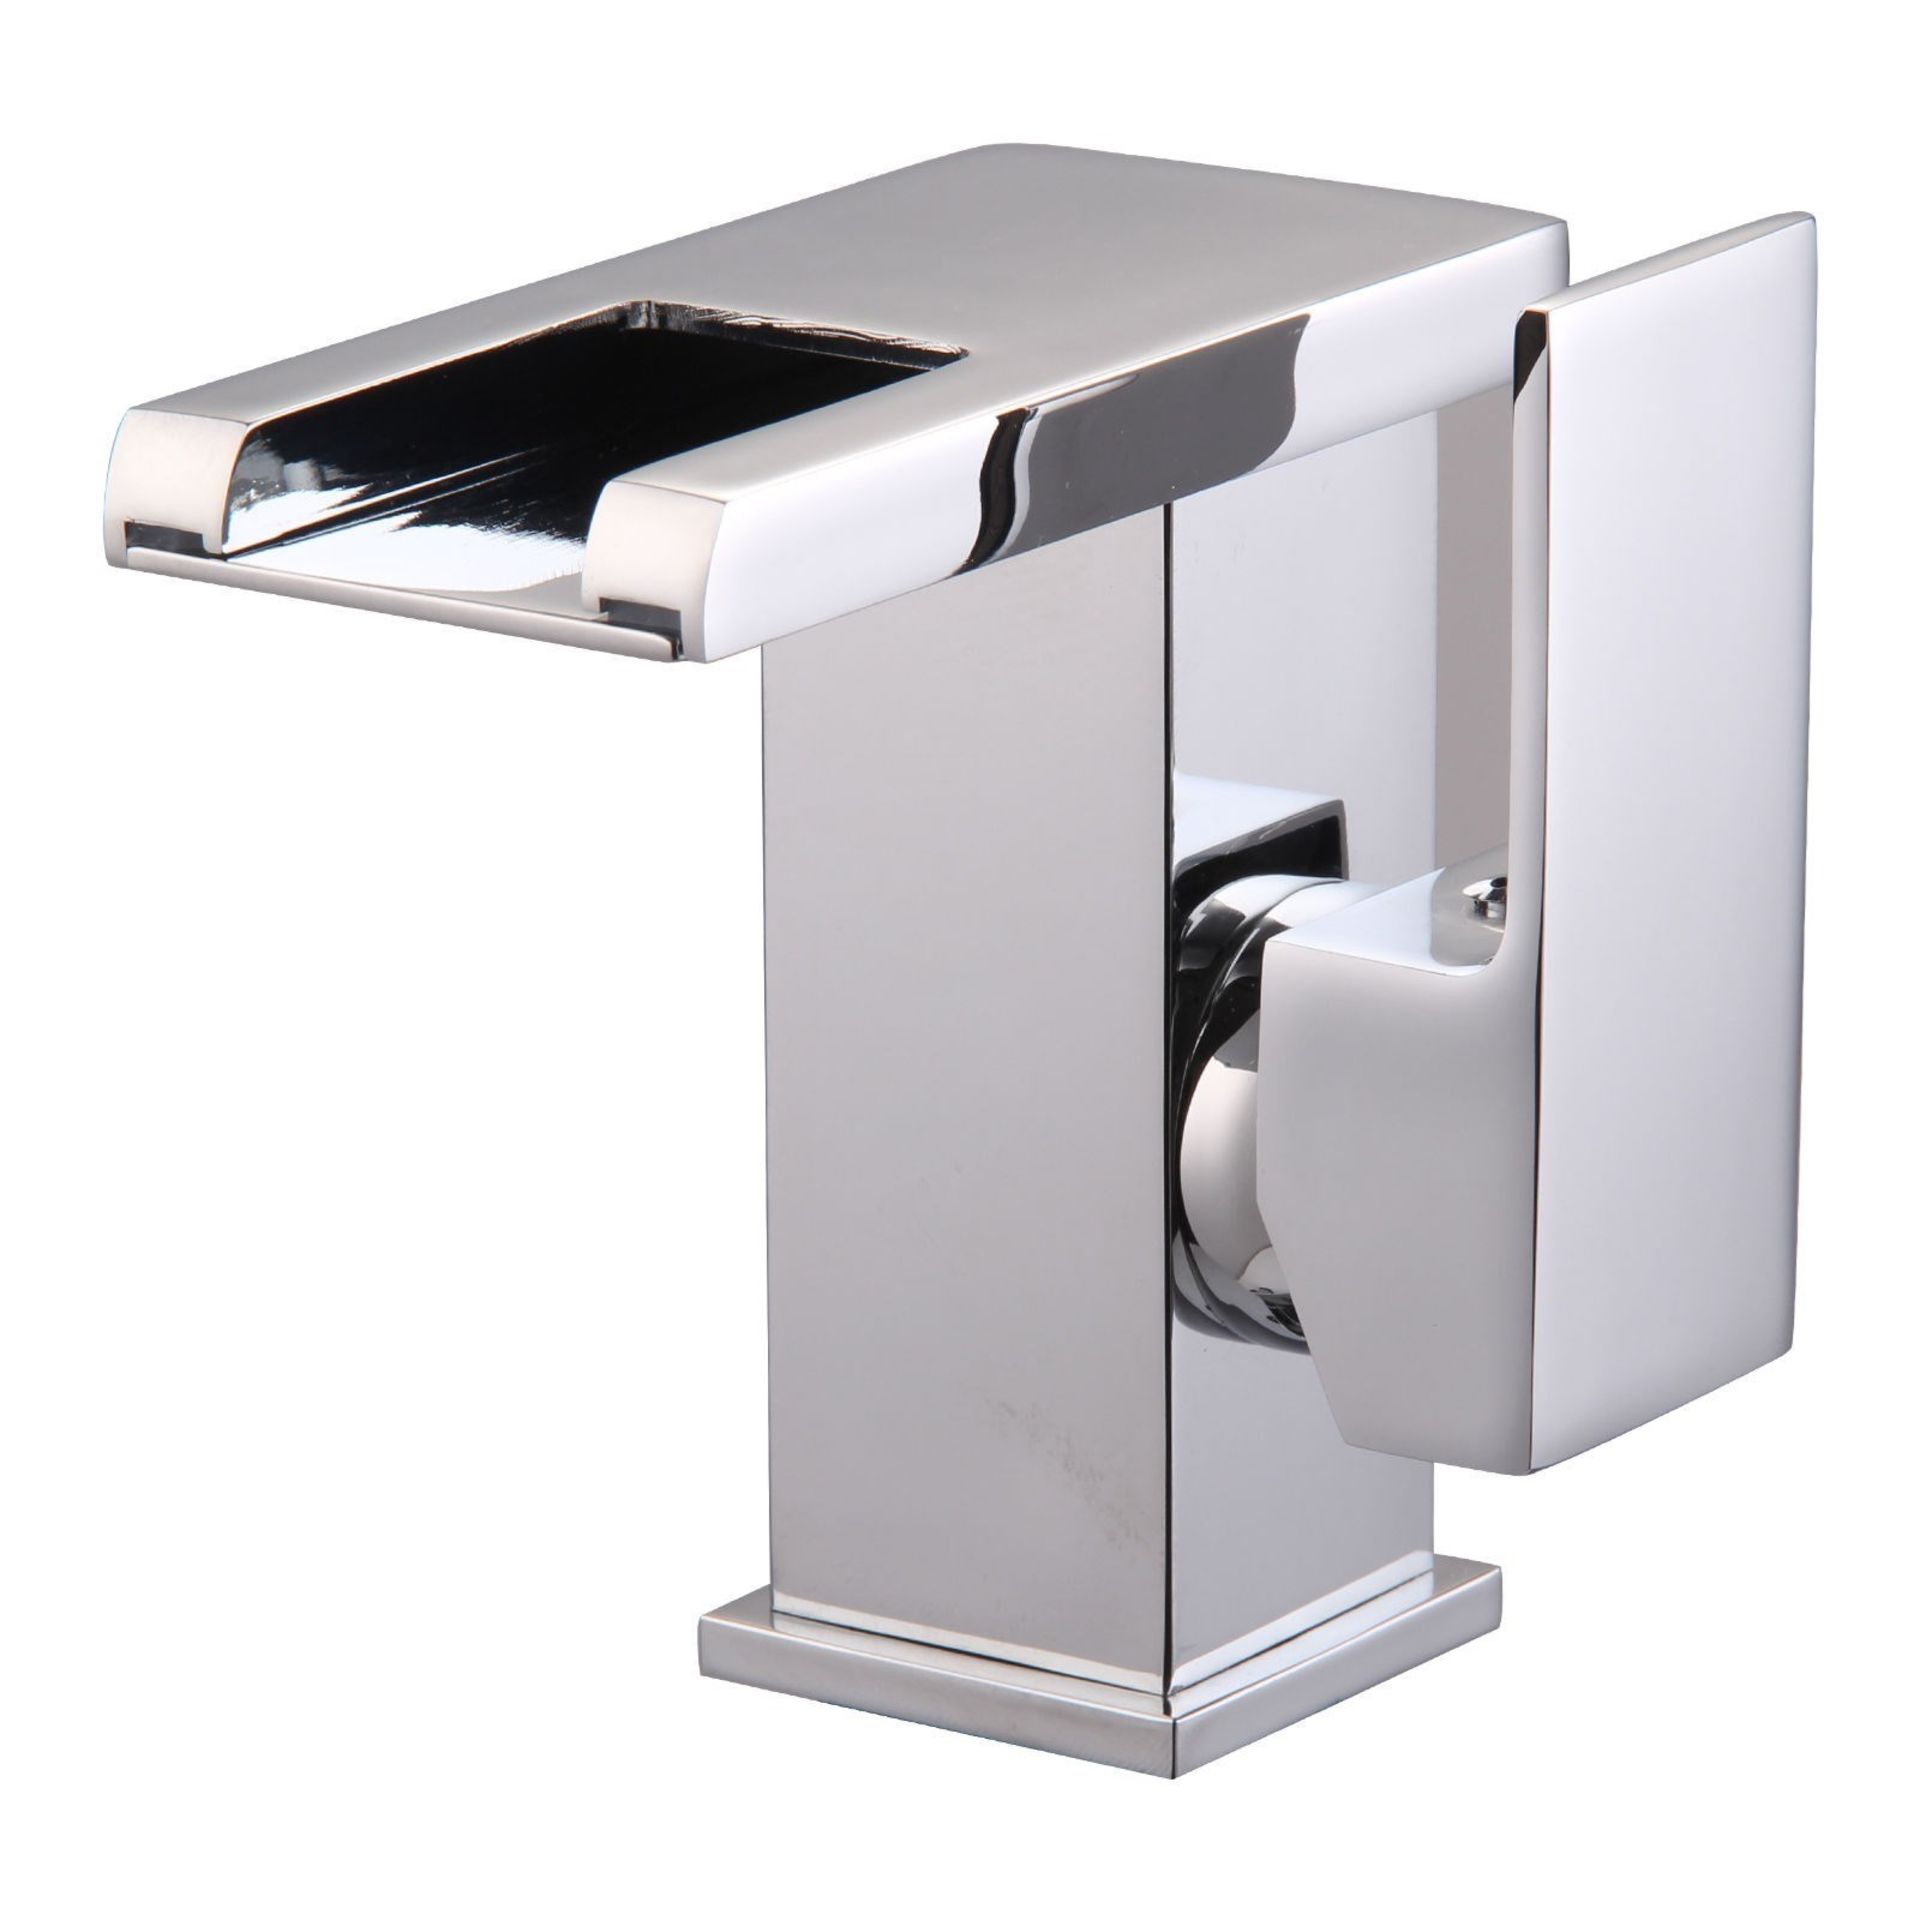 LED Waterfall Bathroom Basin Mixer Tap. RRP £229.99.Easy to install and clean. All copper m... - Image 2 of 3